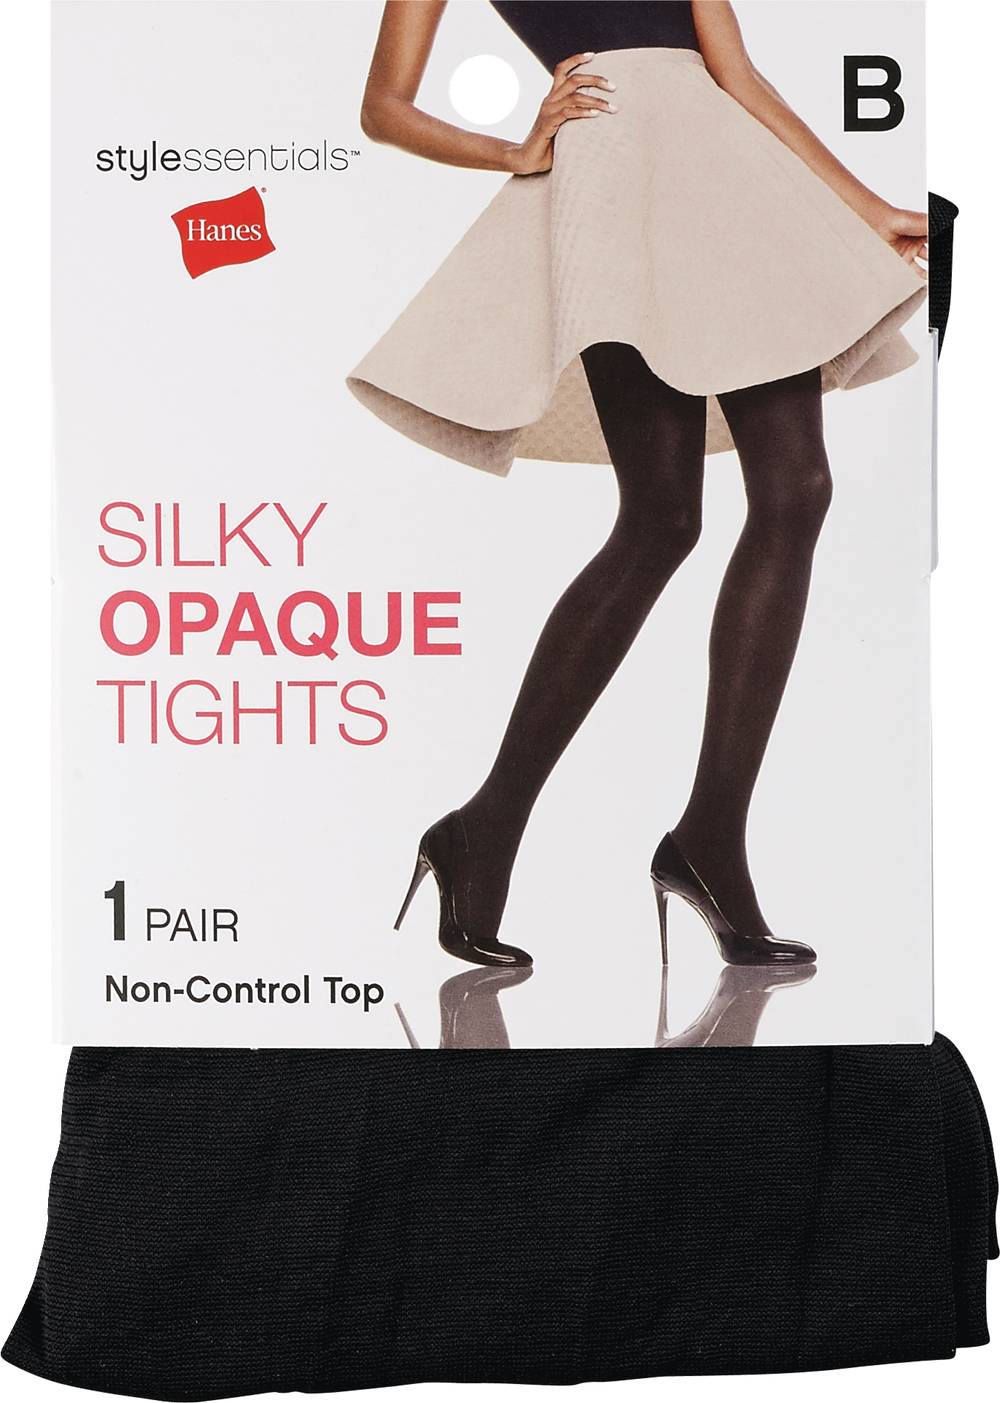 Style Essentials by Hanes Silky Opaque Tights, Black, M/L